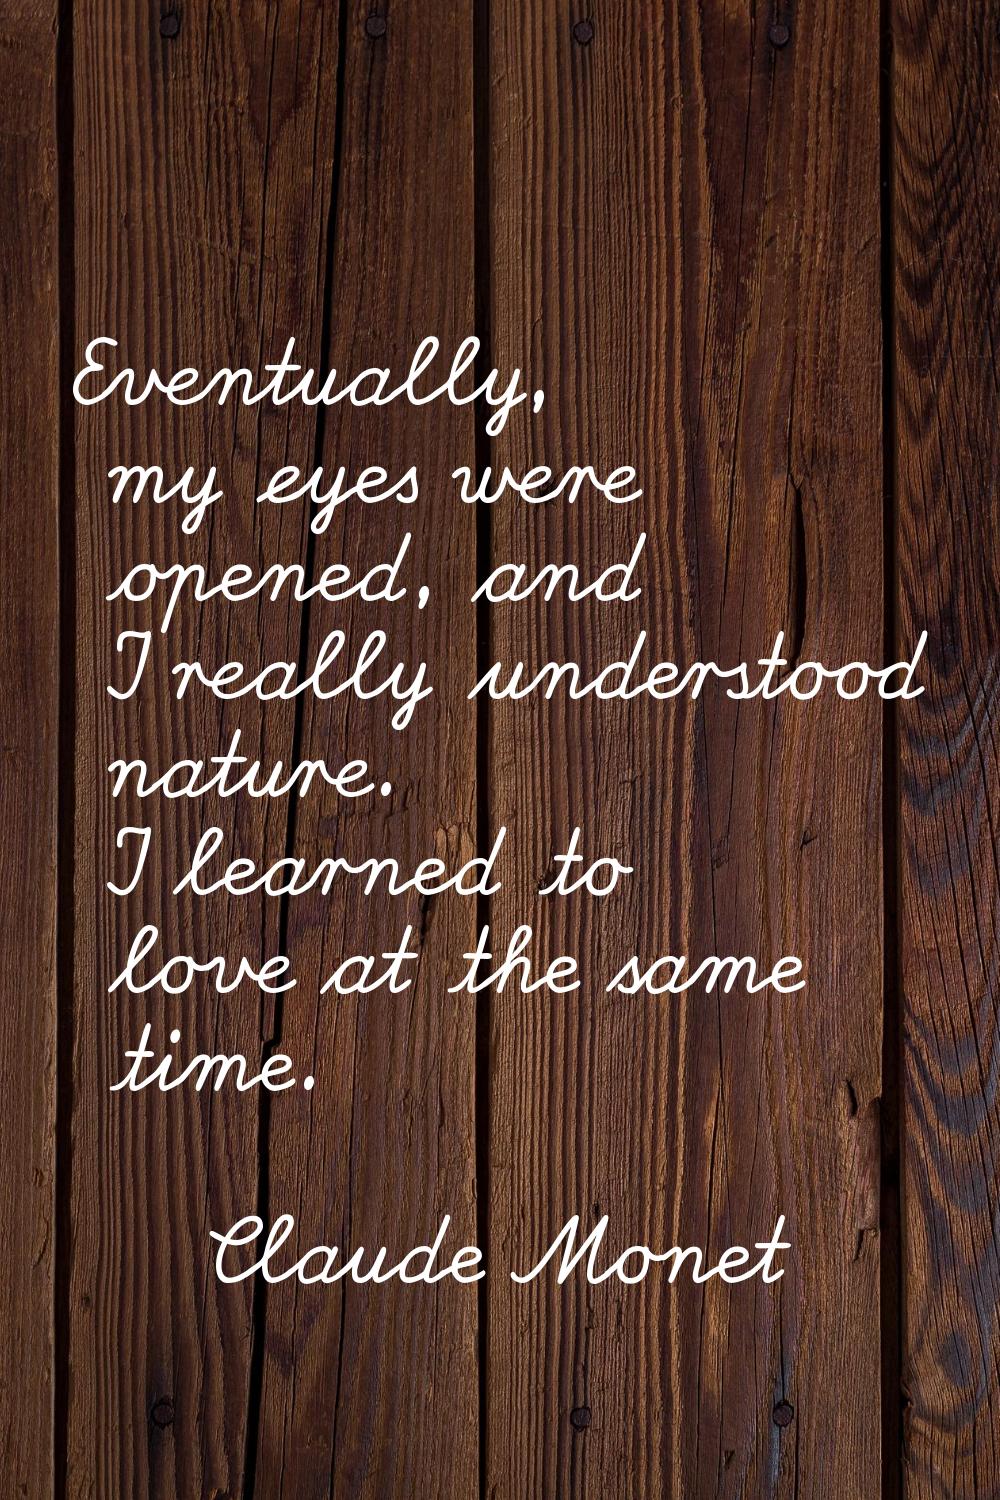 Eventually, my eyes were opened, and I really understood nature. I learned to love at the same time